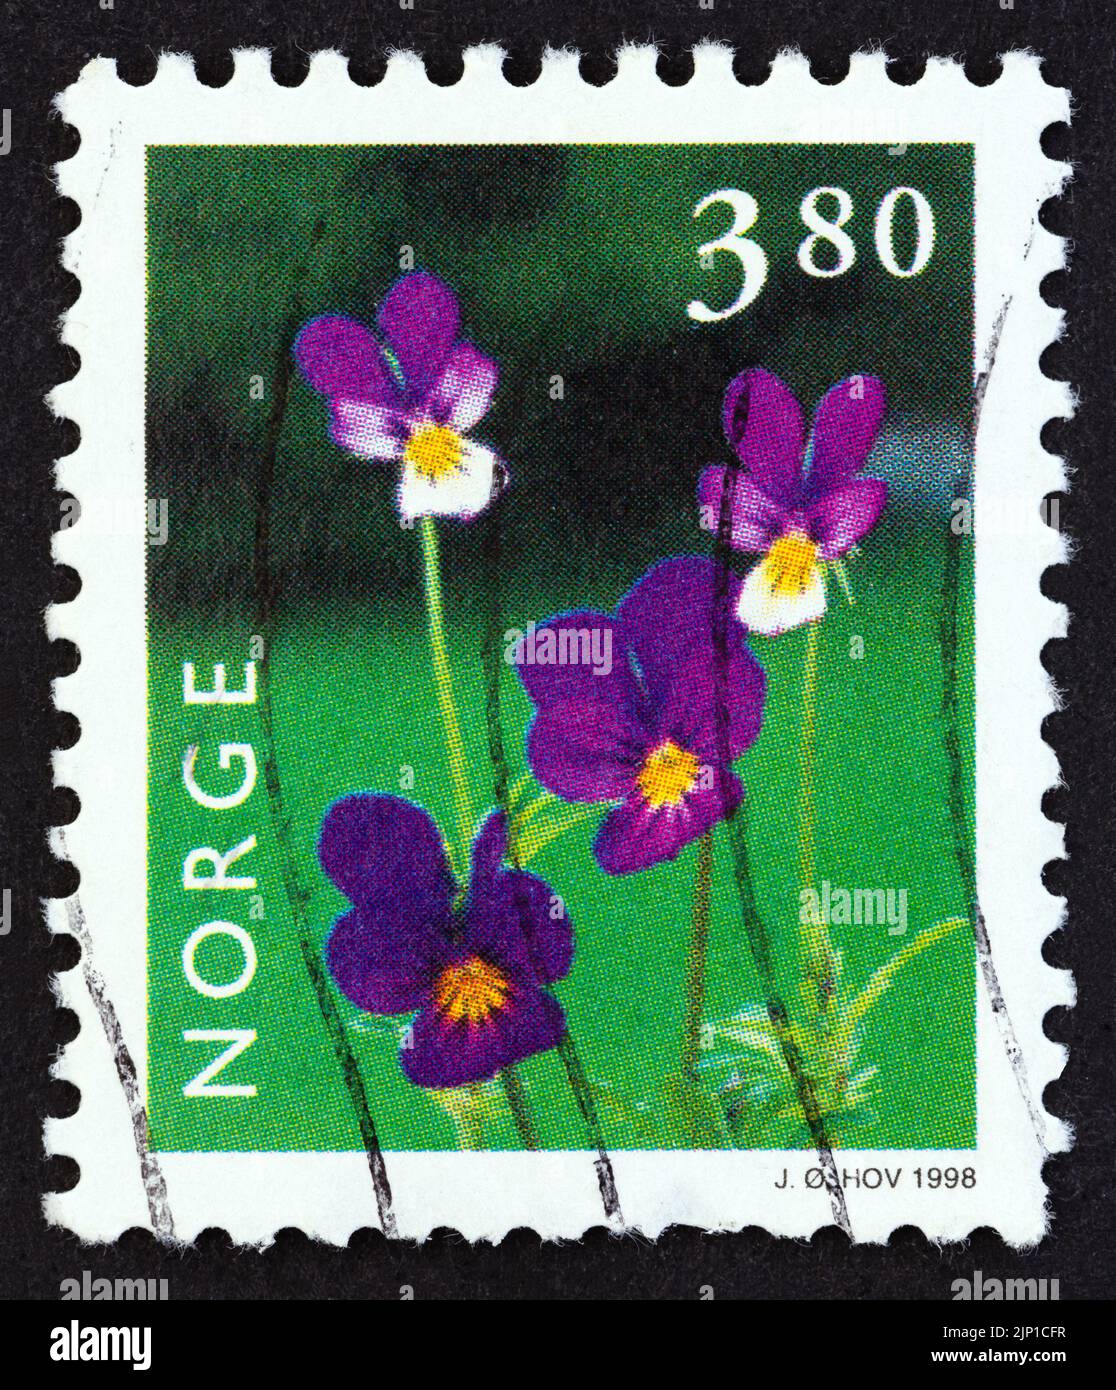 NORWAY - CIRCA 1998: A stamp printed in Norway from the 'Norwegian Flora' issue shows Viola tricolor, circa 1998. Stock Photo